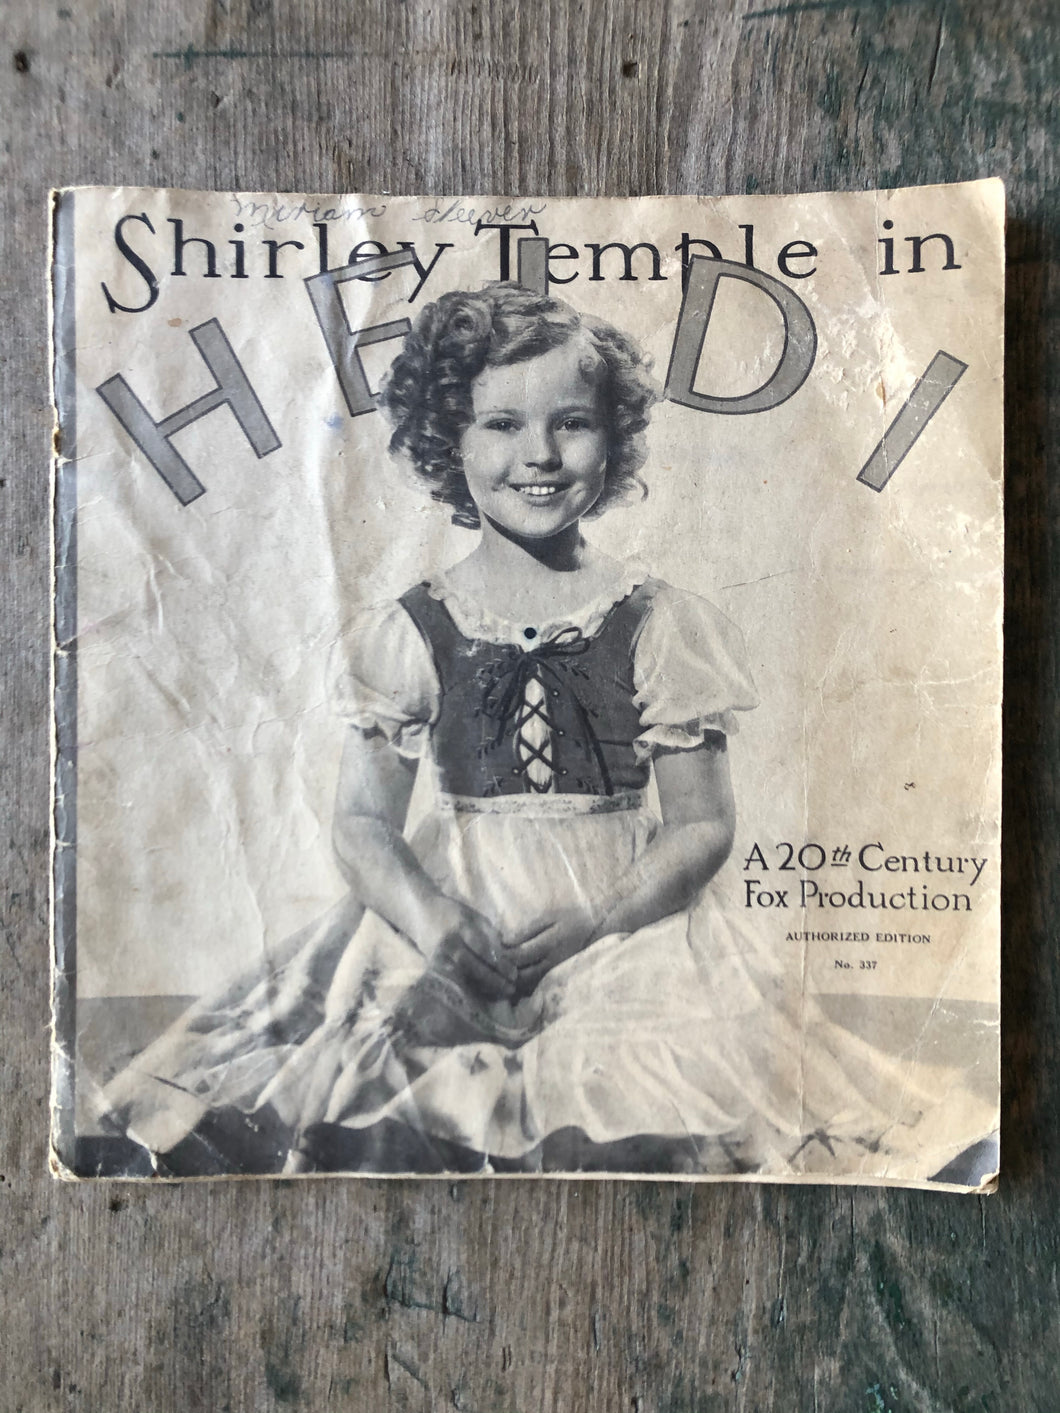 “Shirley Temple in ‘Heidi’” from the story by Johanni Spyri